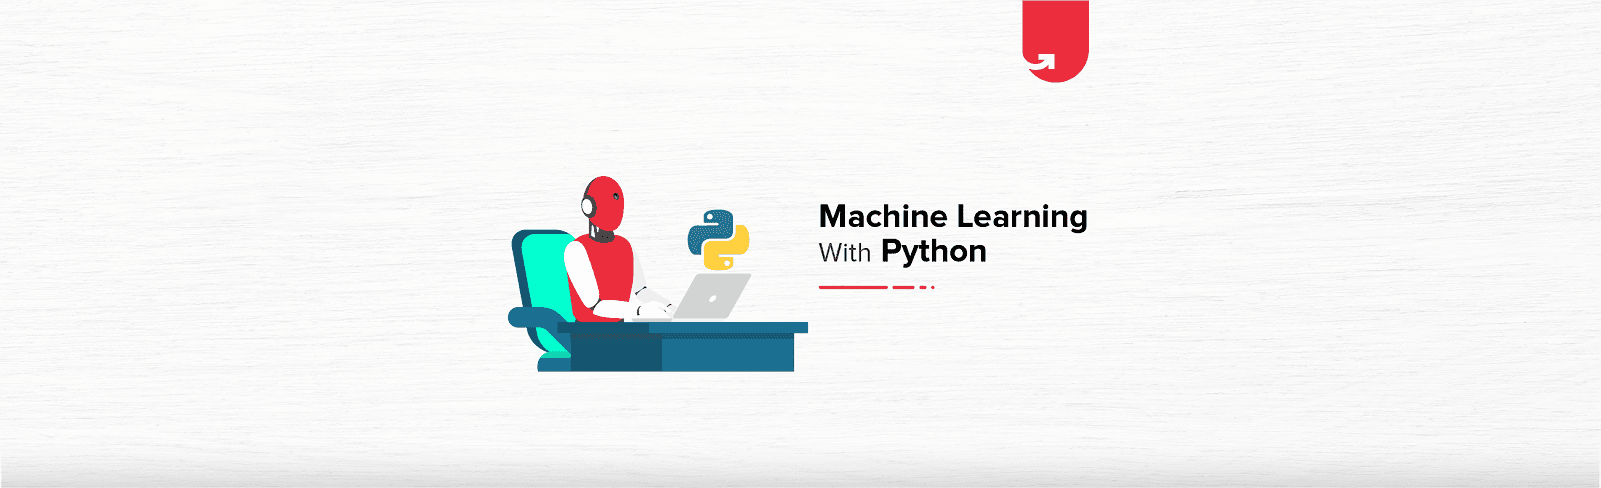 Machine Learning with Python: List of Algorithms You Need to Master